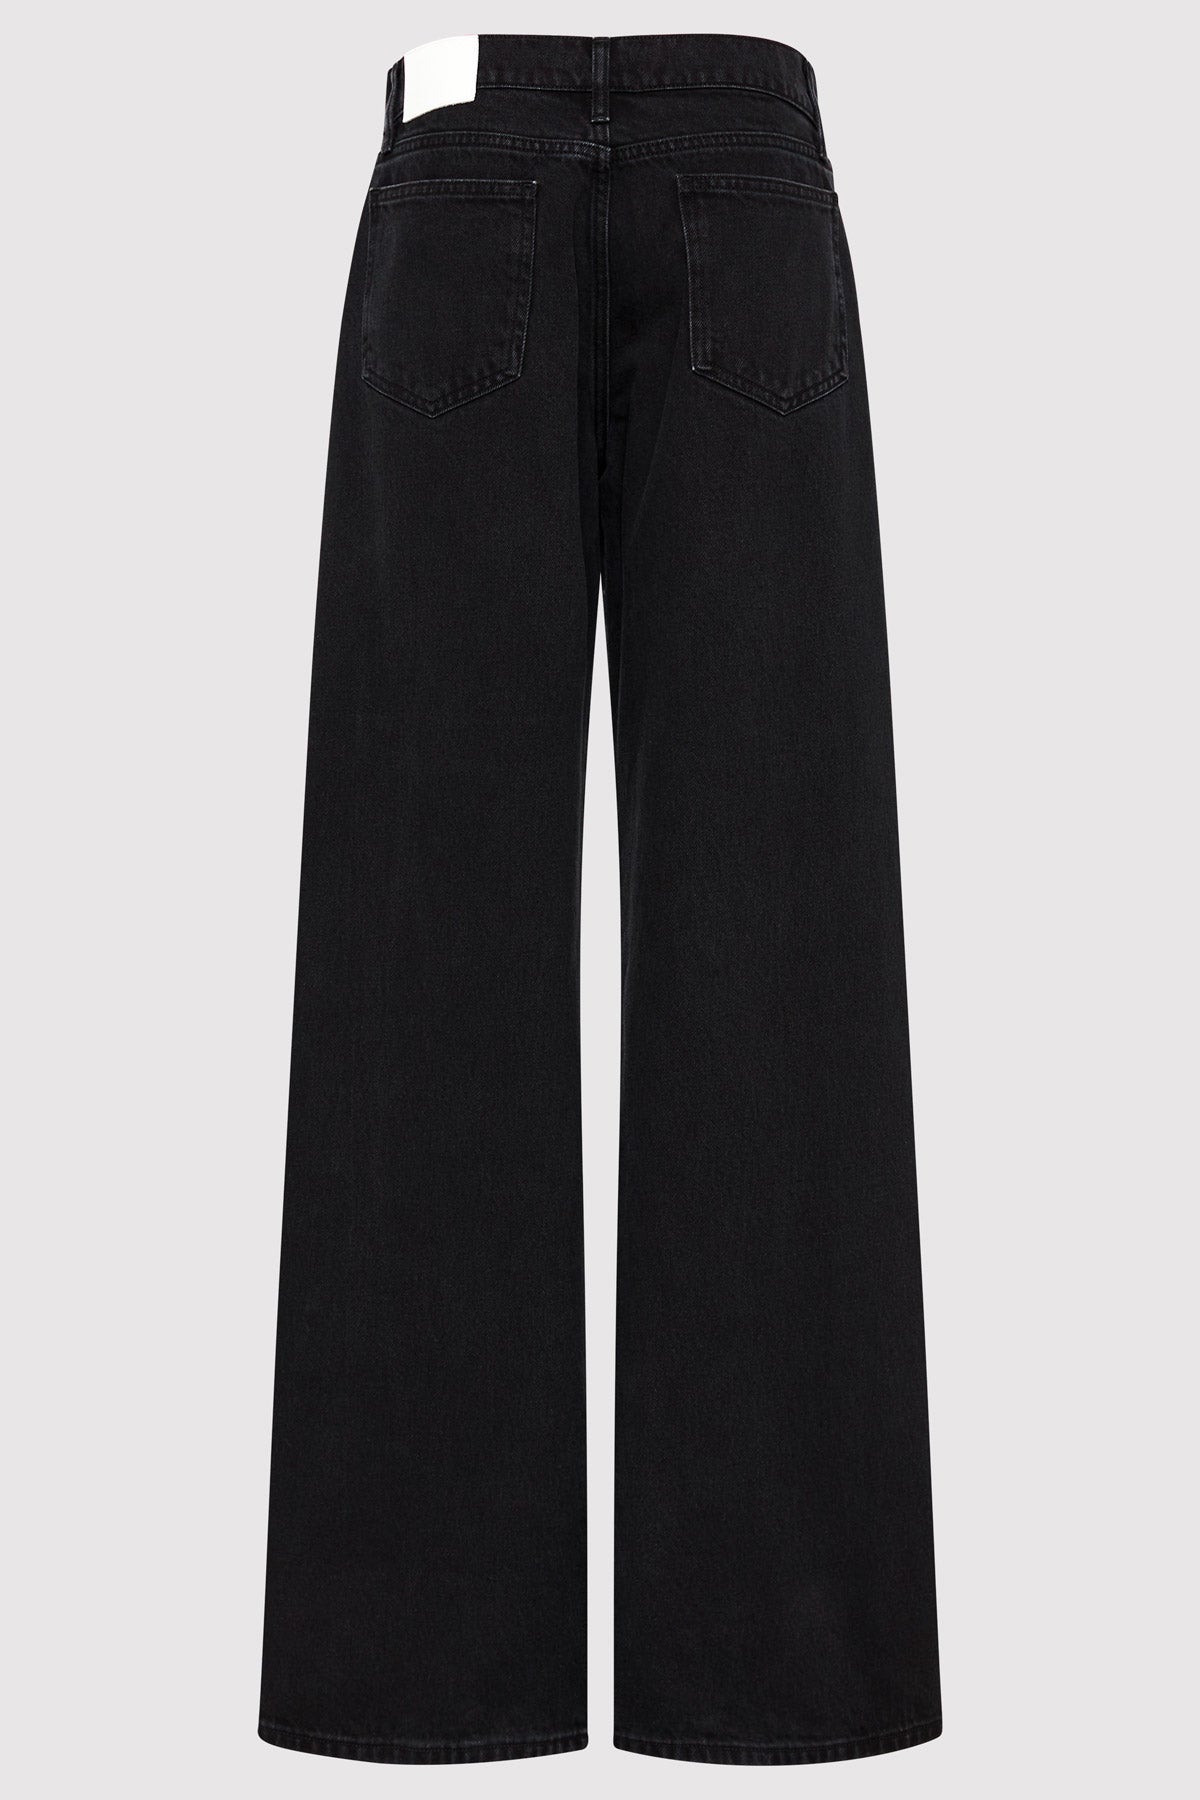 Low Rise Jeans - Washed Black